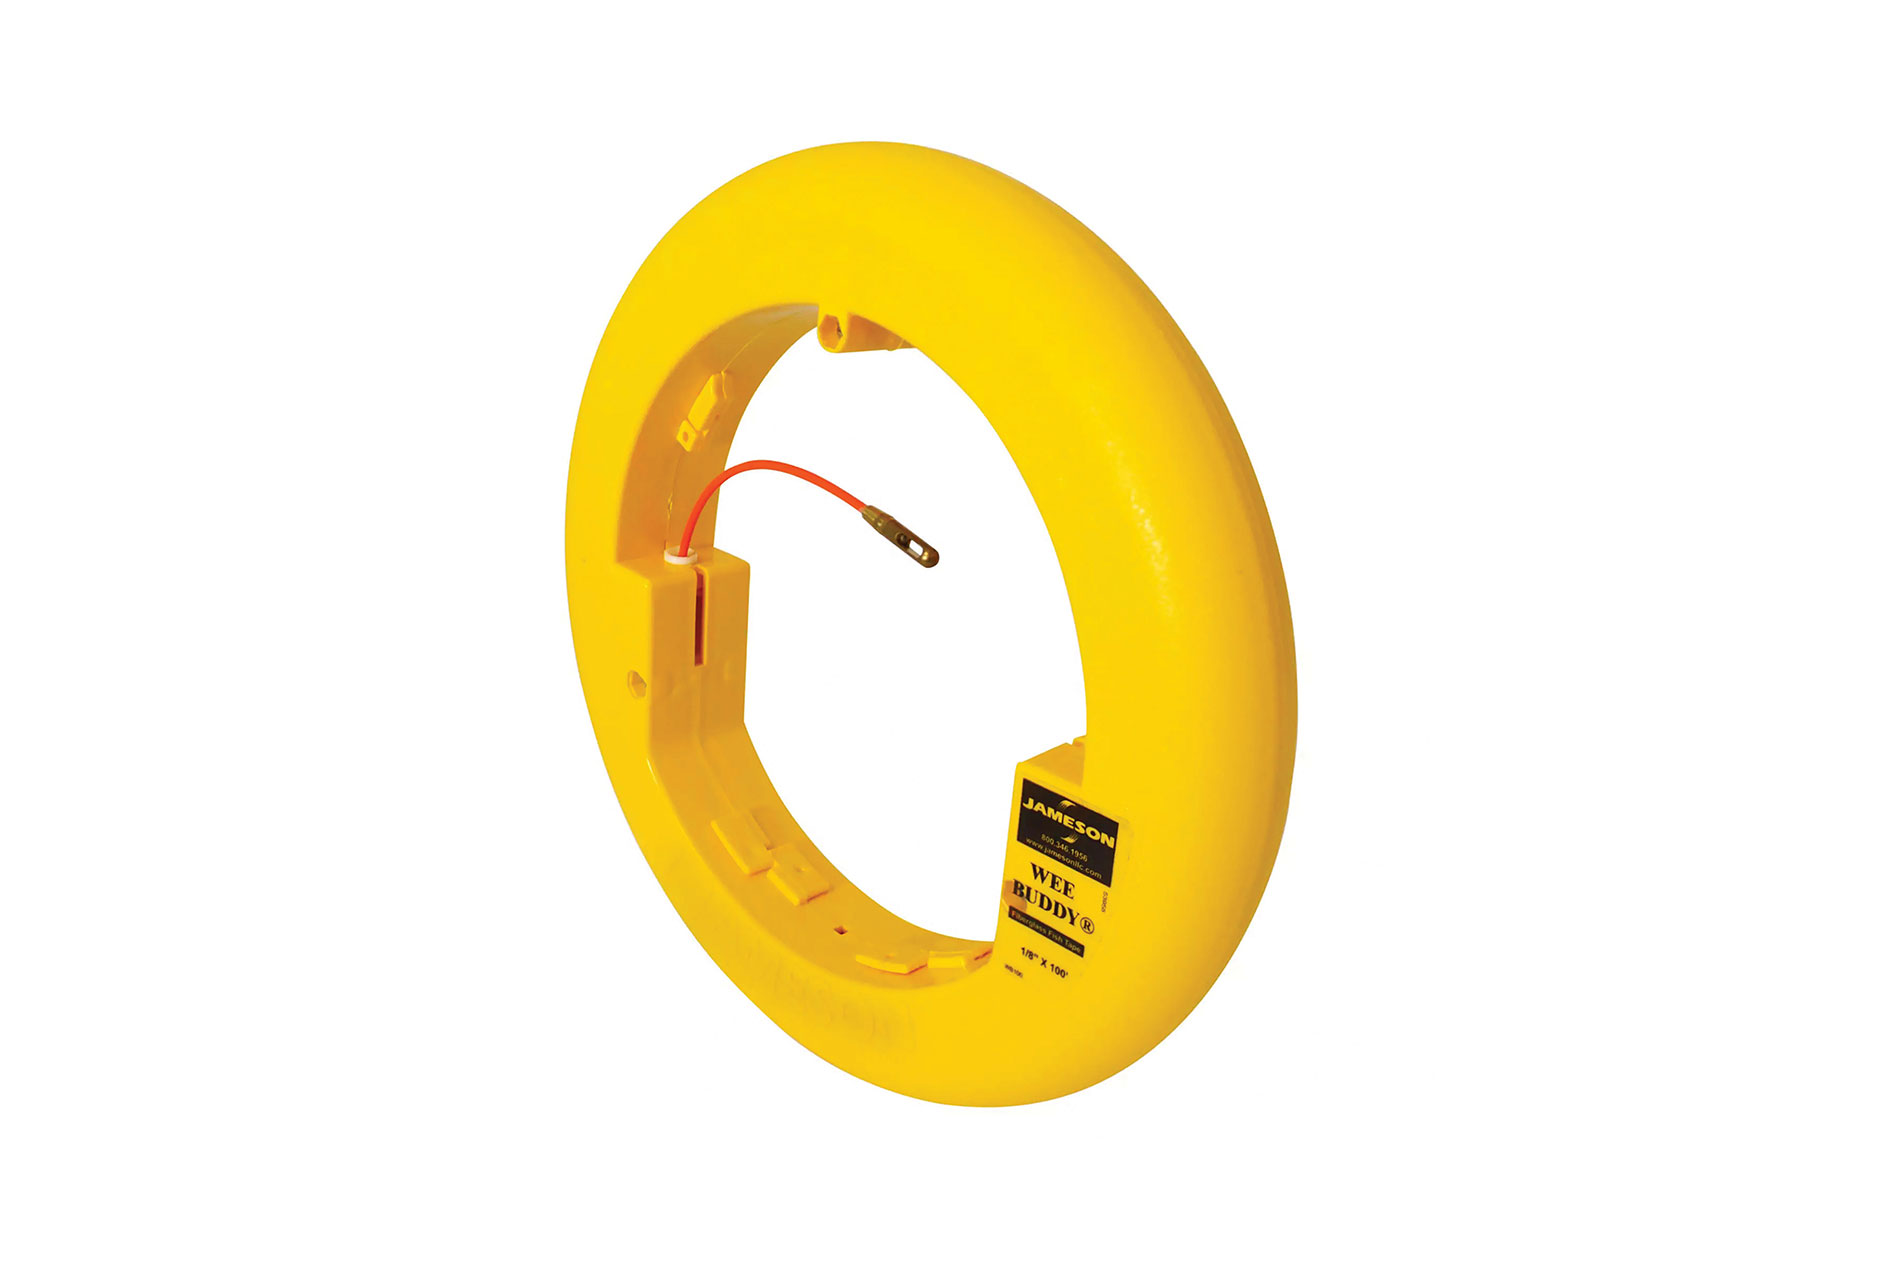 Round yellow fish tape case. Image by Jameson.